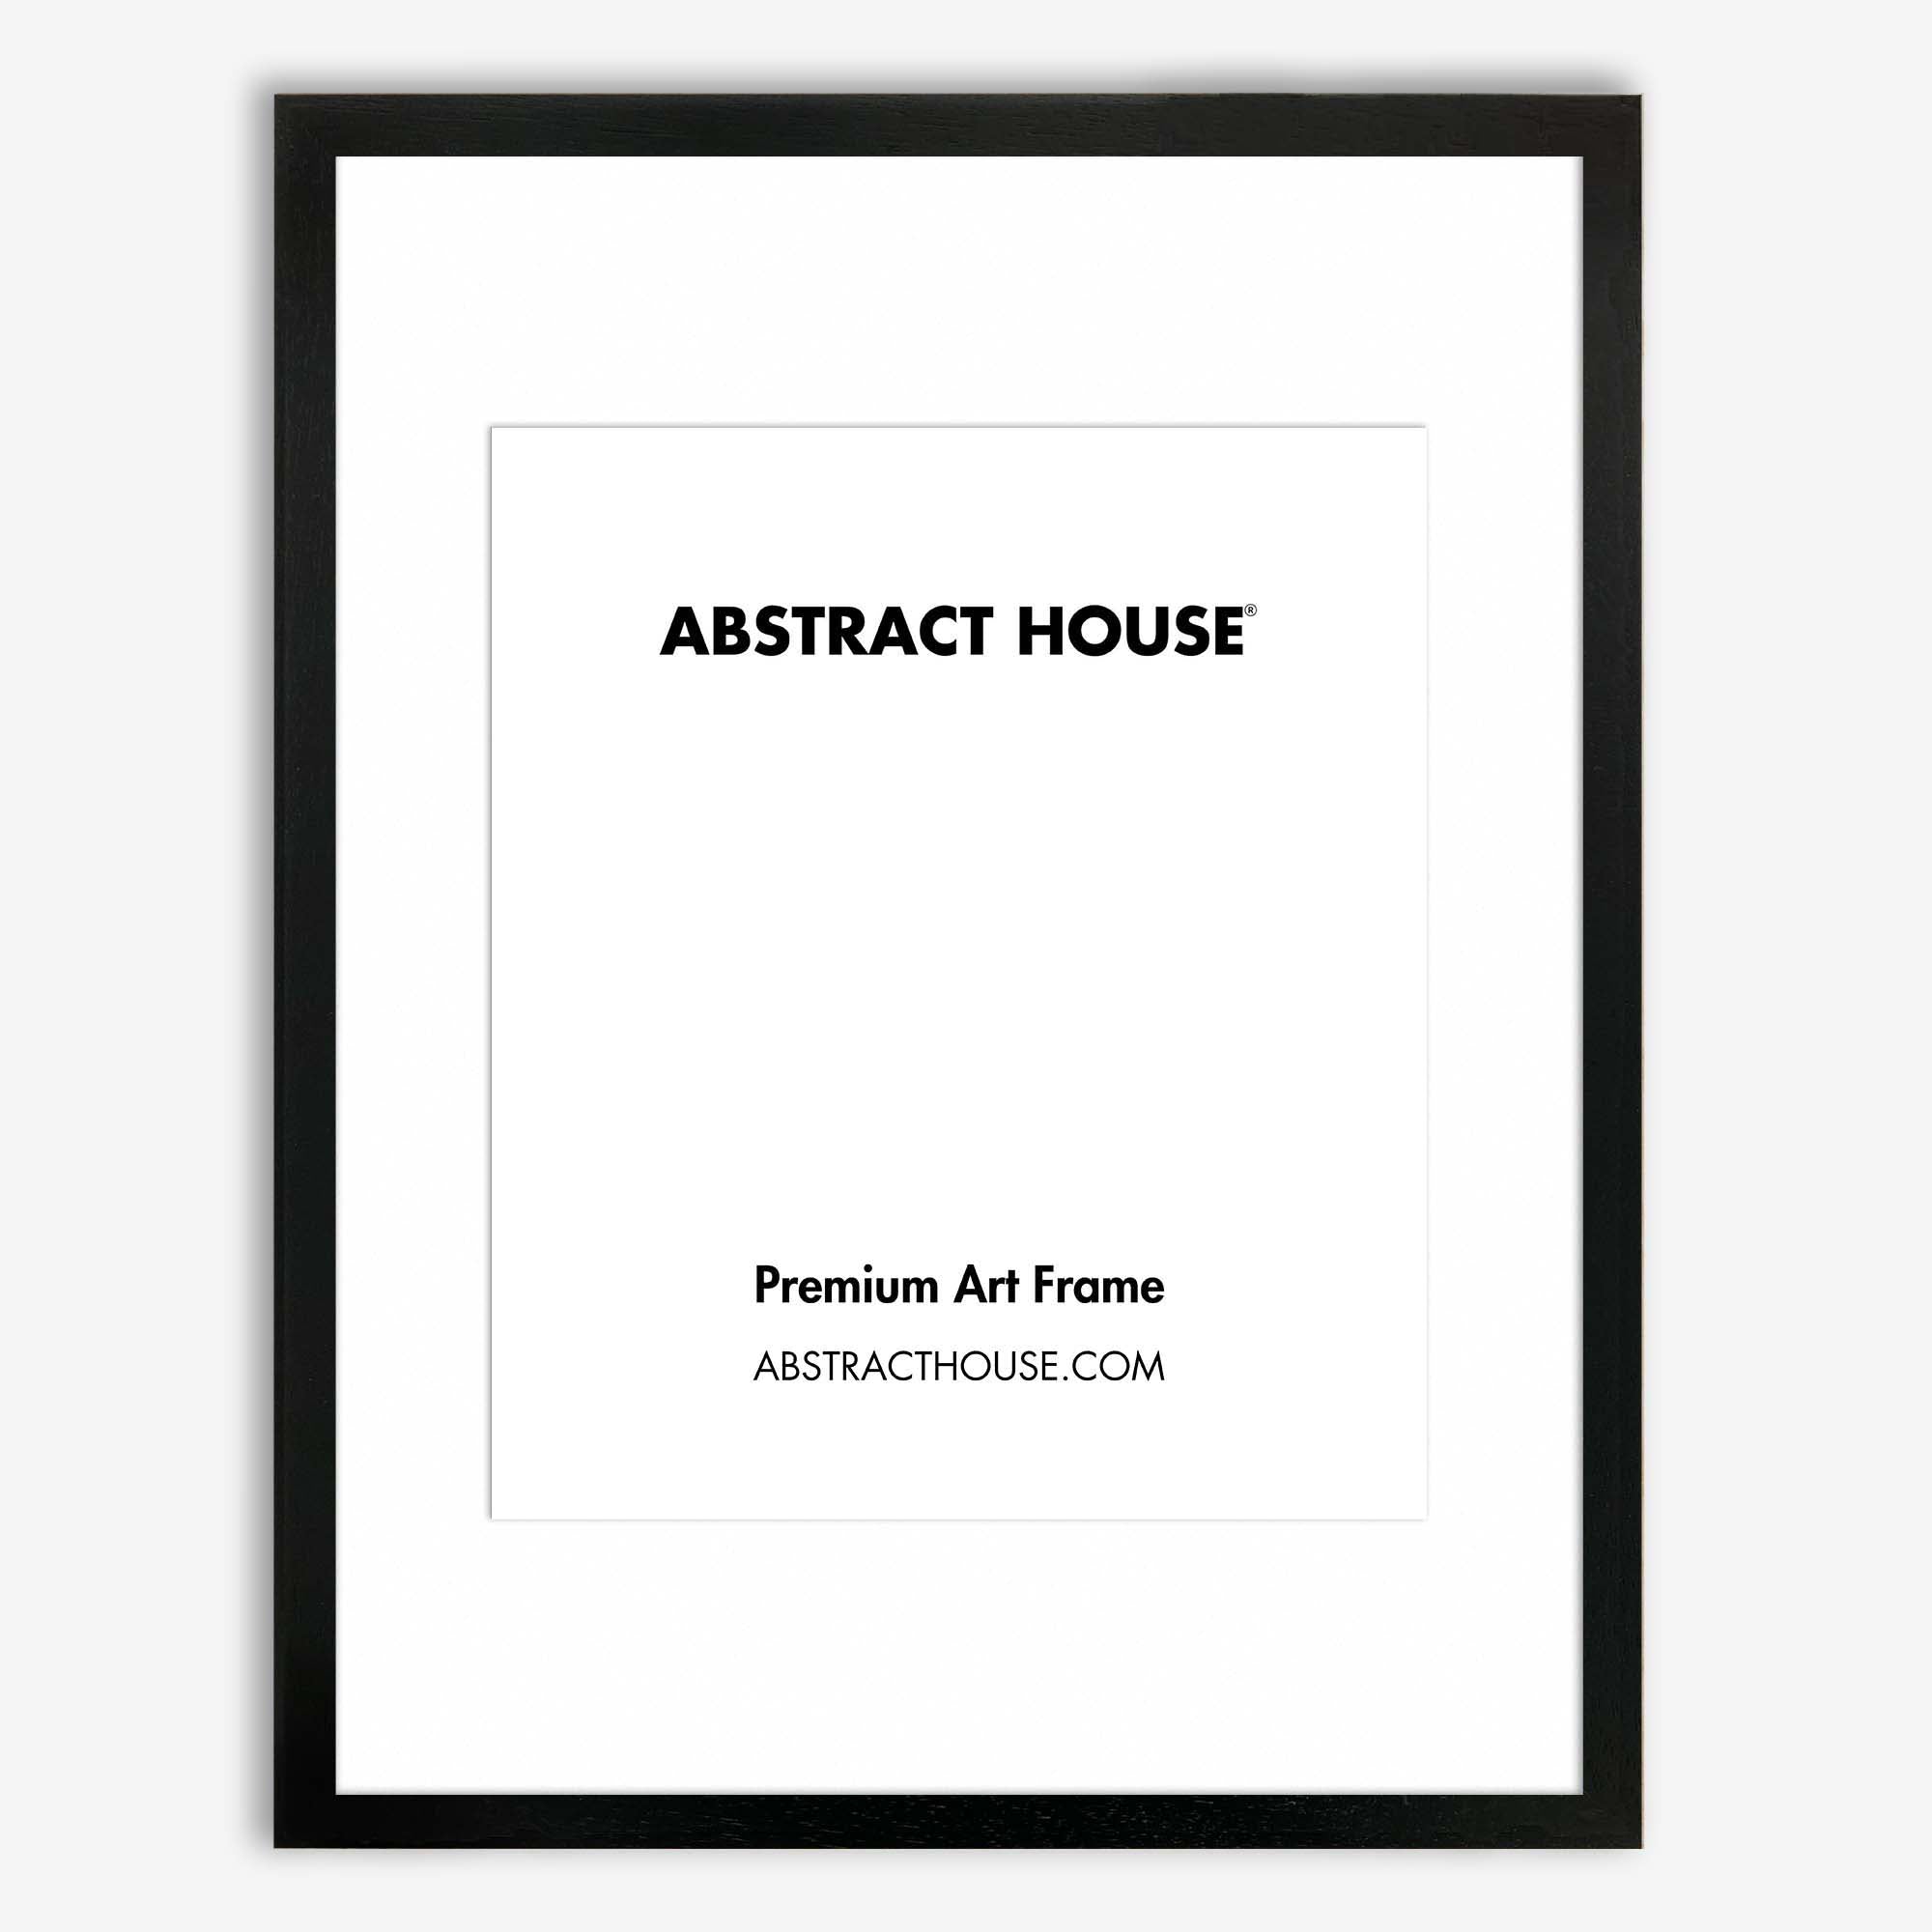 50x70cm Wooden Picture Frame-Black-40 x 50 cm-Abstract House